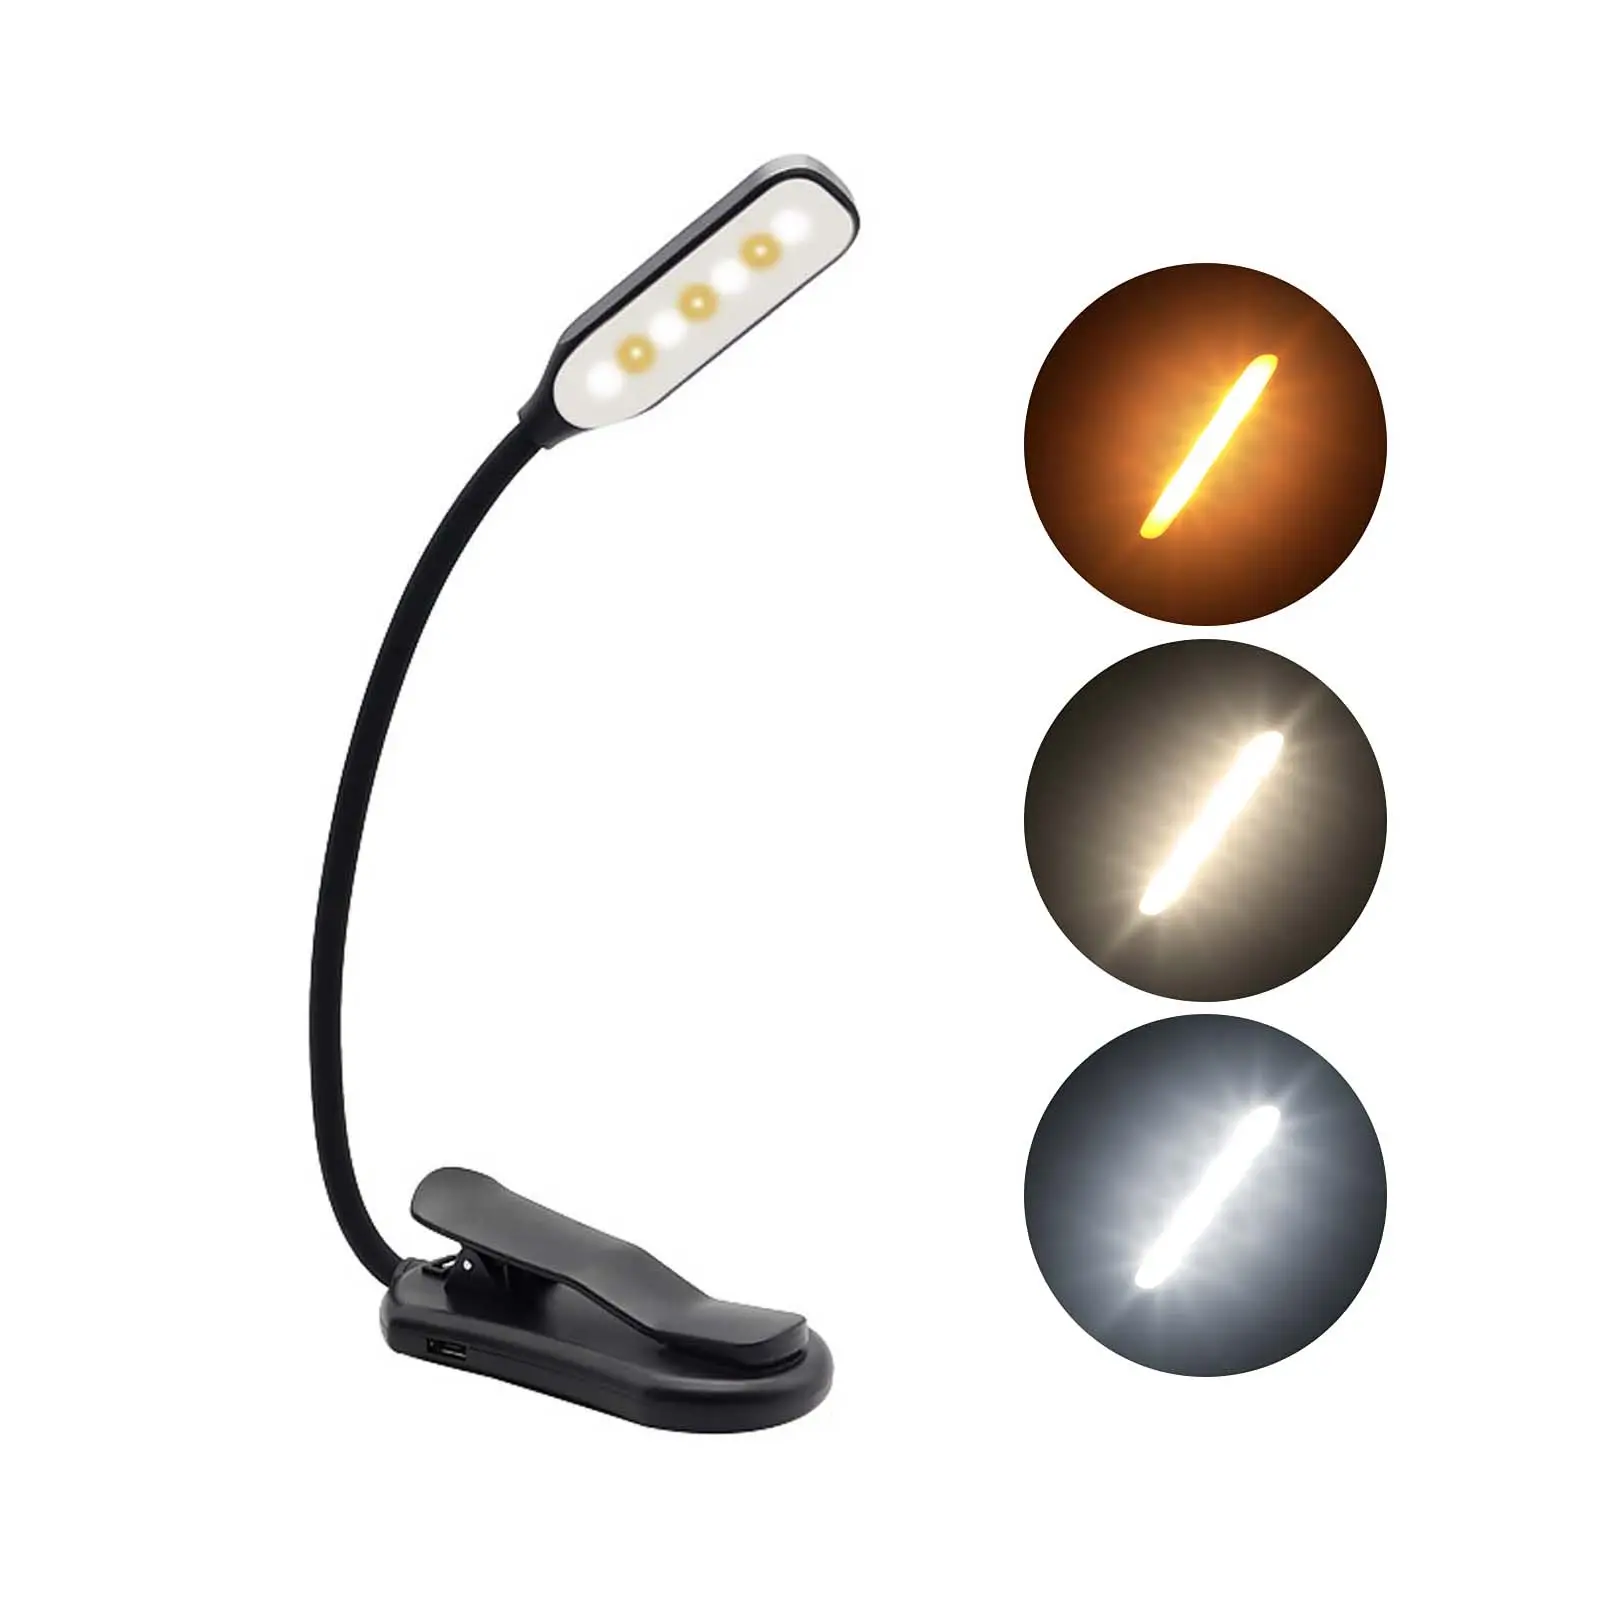 7 LED Reading Table Clamp Lamp Portable Rechargeable Modern flexible bed reading light